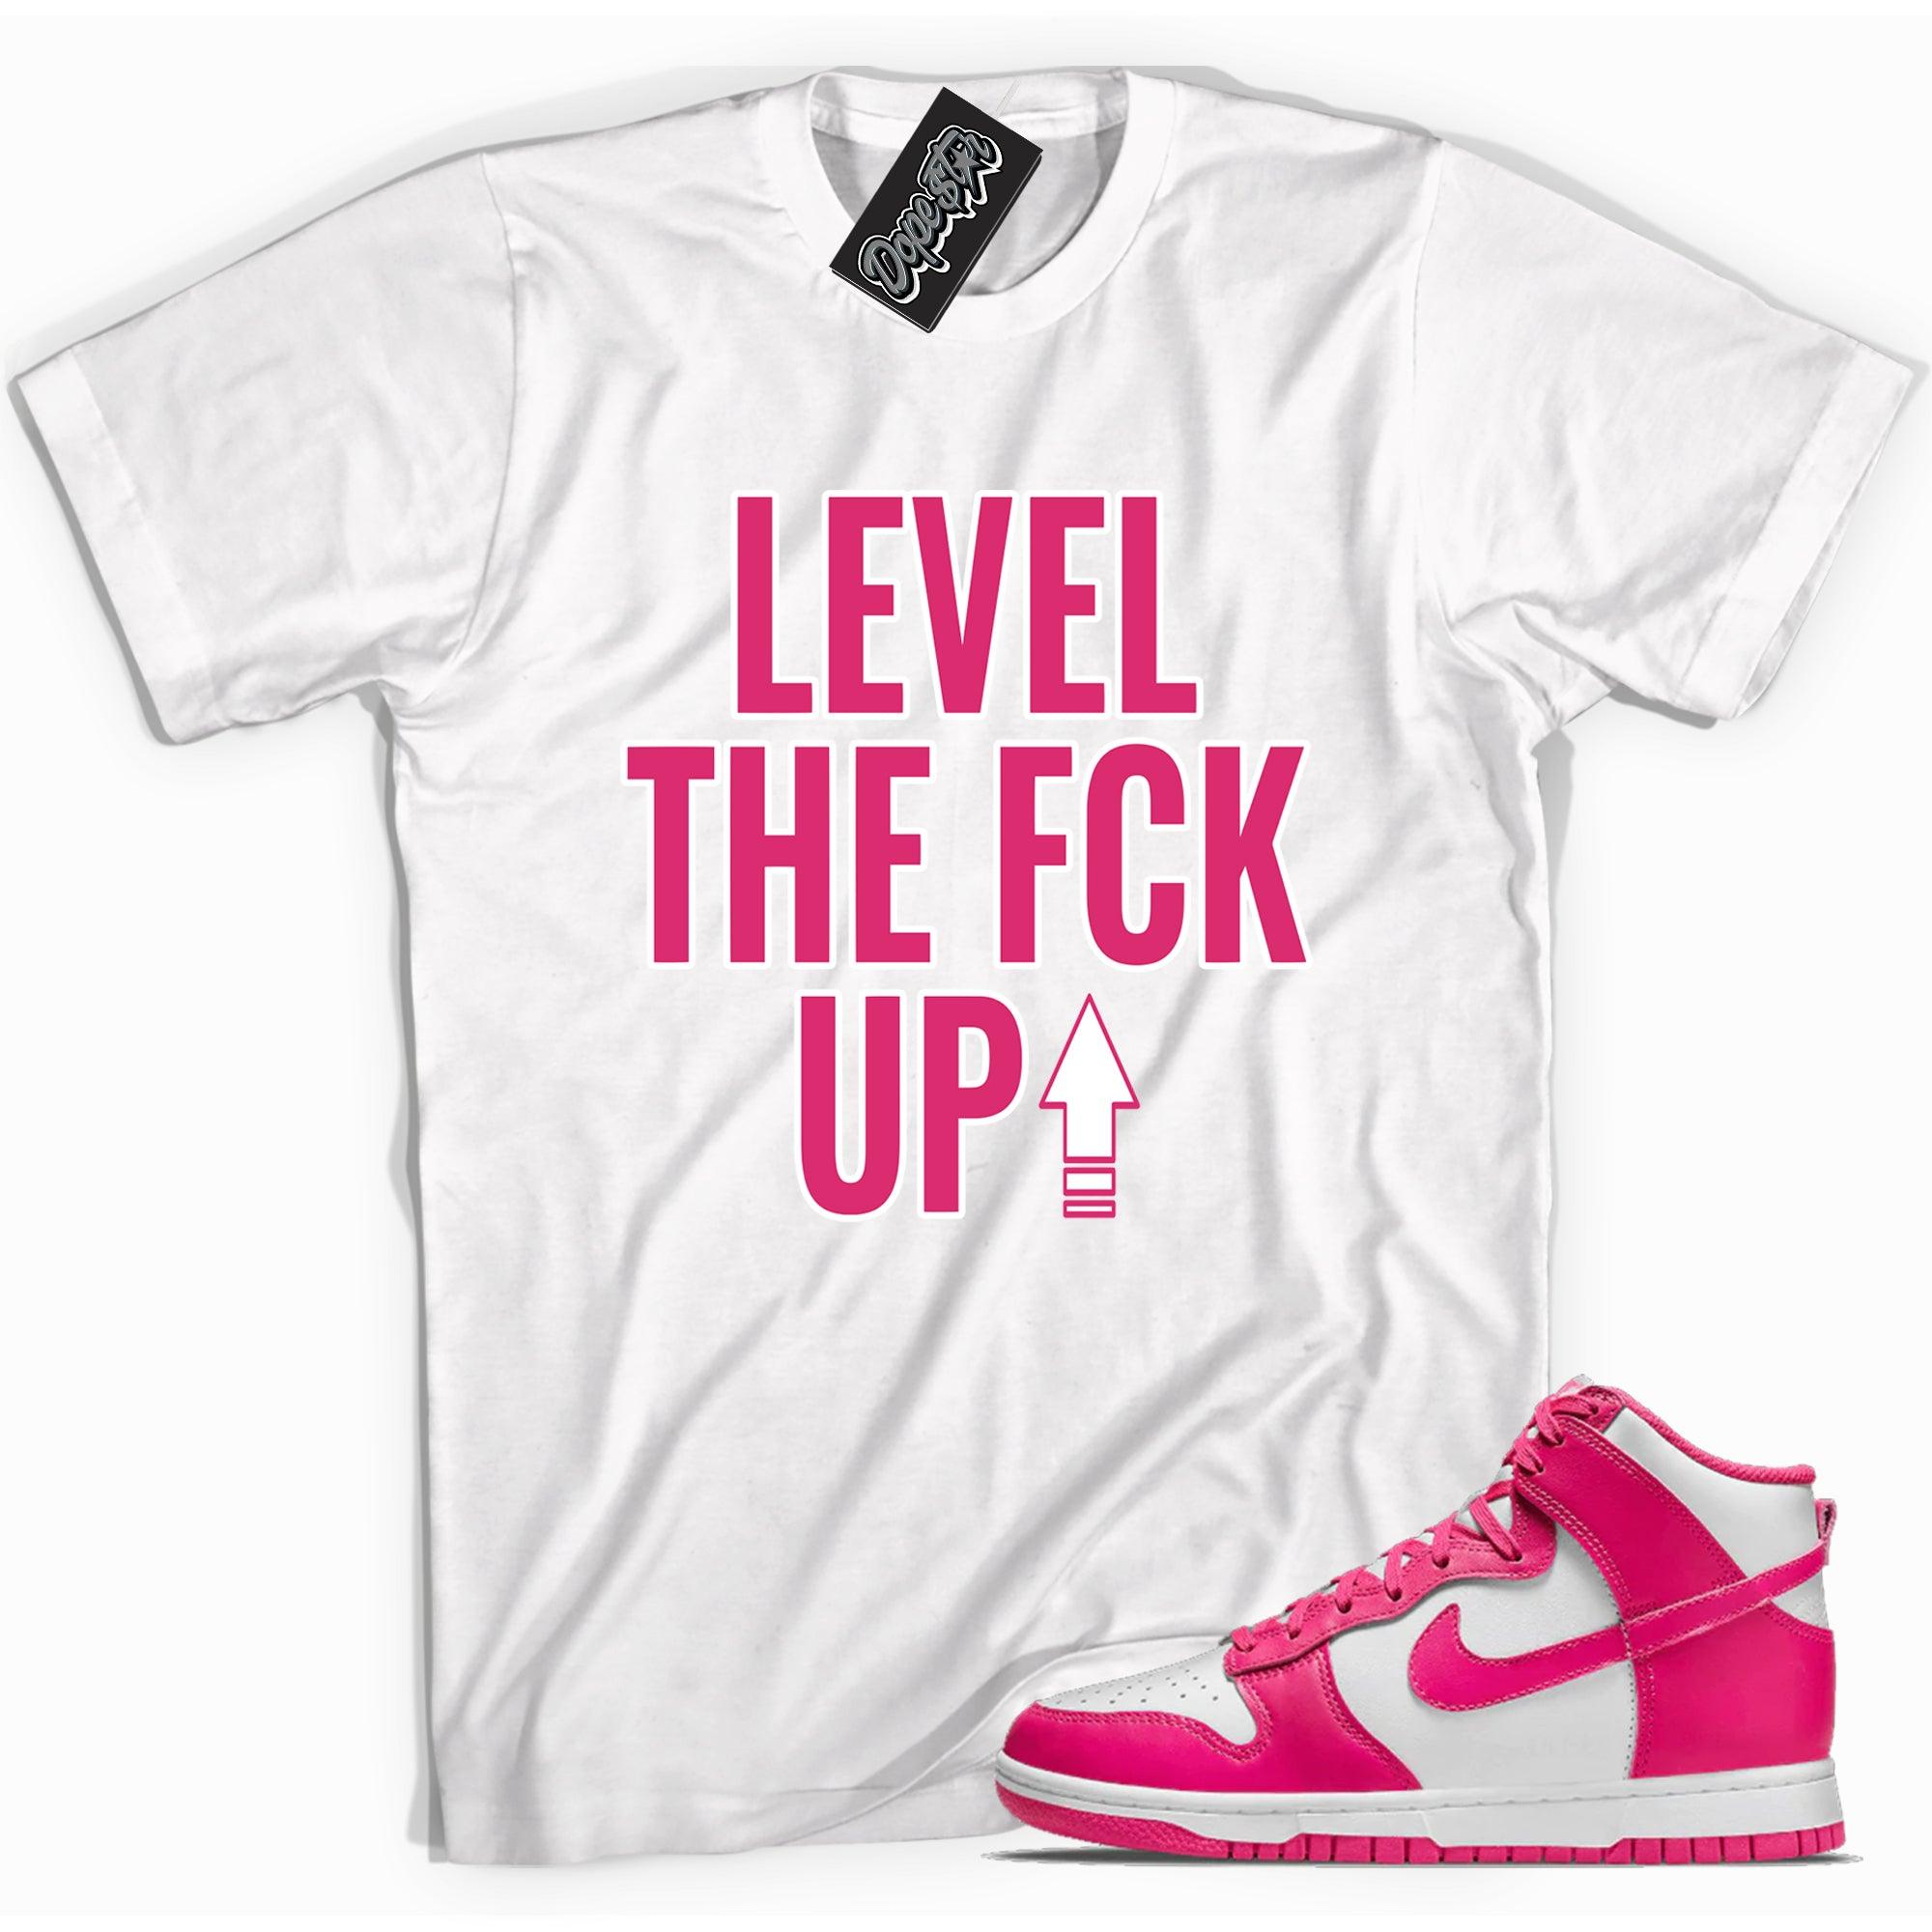 Cool white graphic tee with 'Level Up' print, that perfectly matches Nike Dunk High Pink Prime sneakers.